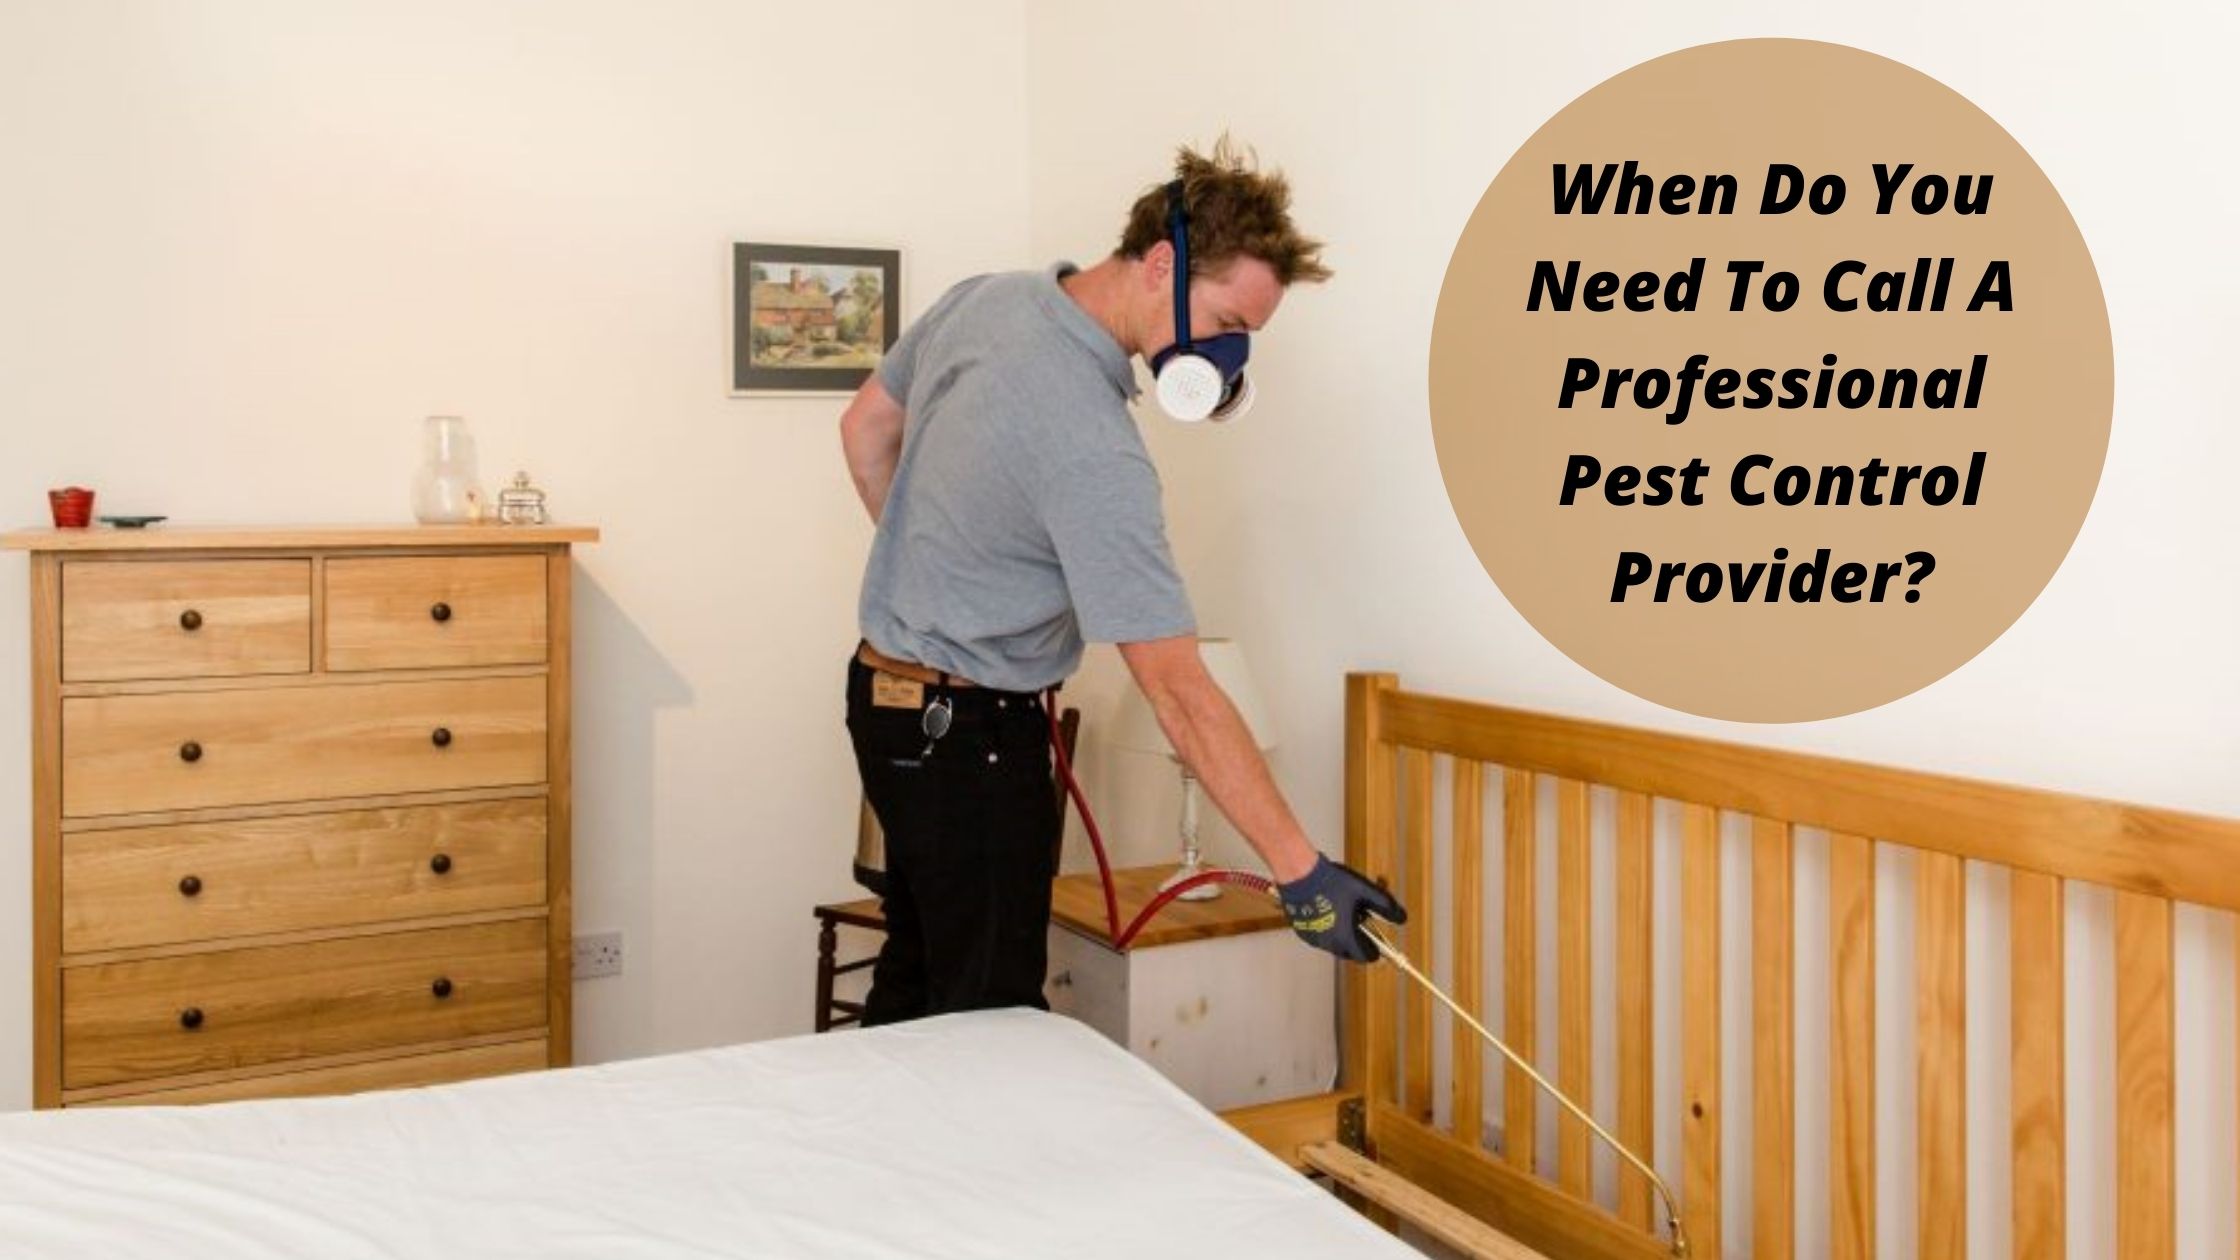 When Do You Need To Call A Professional Pest Control Provider